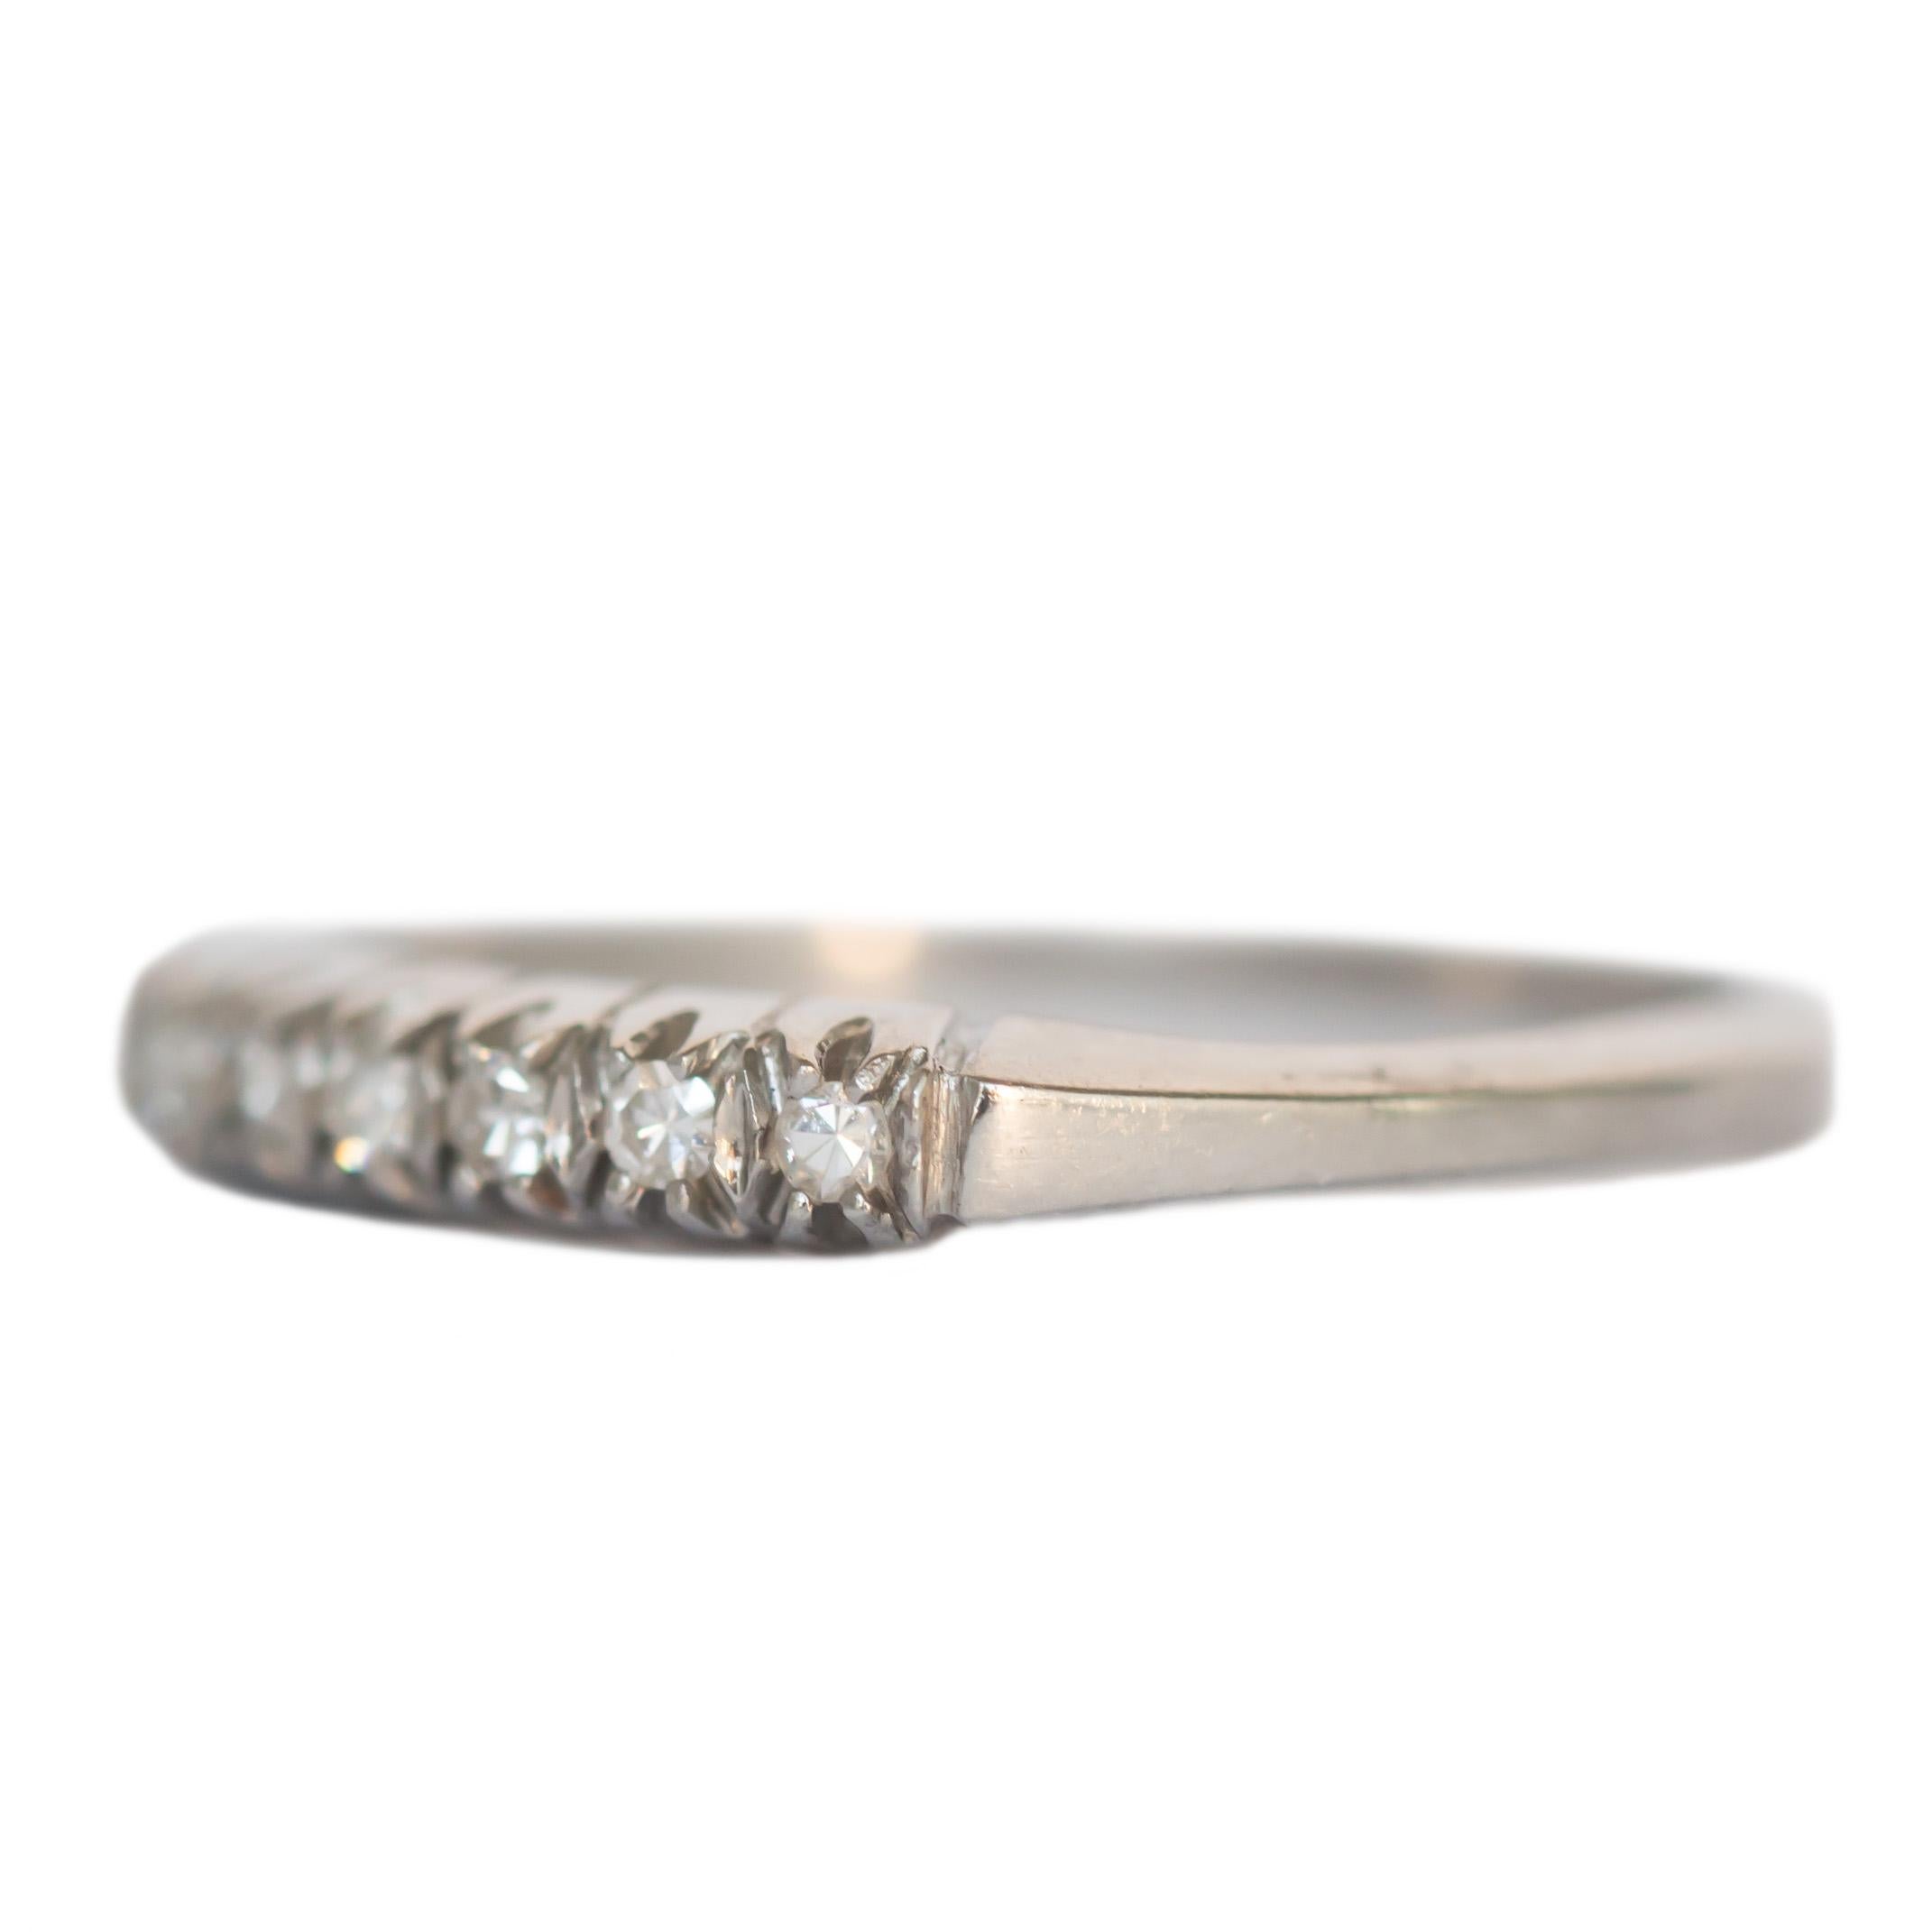 Item Details: 
Ring Size: 5.75
Metal Type: Platinum [Hallmark and Tested]
Weight: 2.5 grams

Side Stone Details: 
Shape: Old Single Cut
Total Carat Weight: .15 carat, total weight
Color: G
Clarity: VS

Finger to Top of Stone Measurement: 2.2